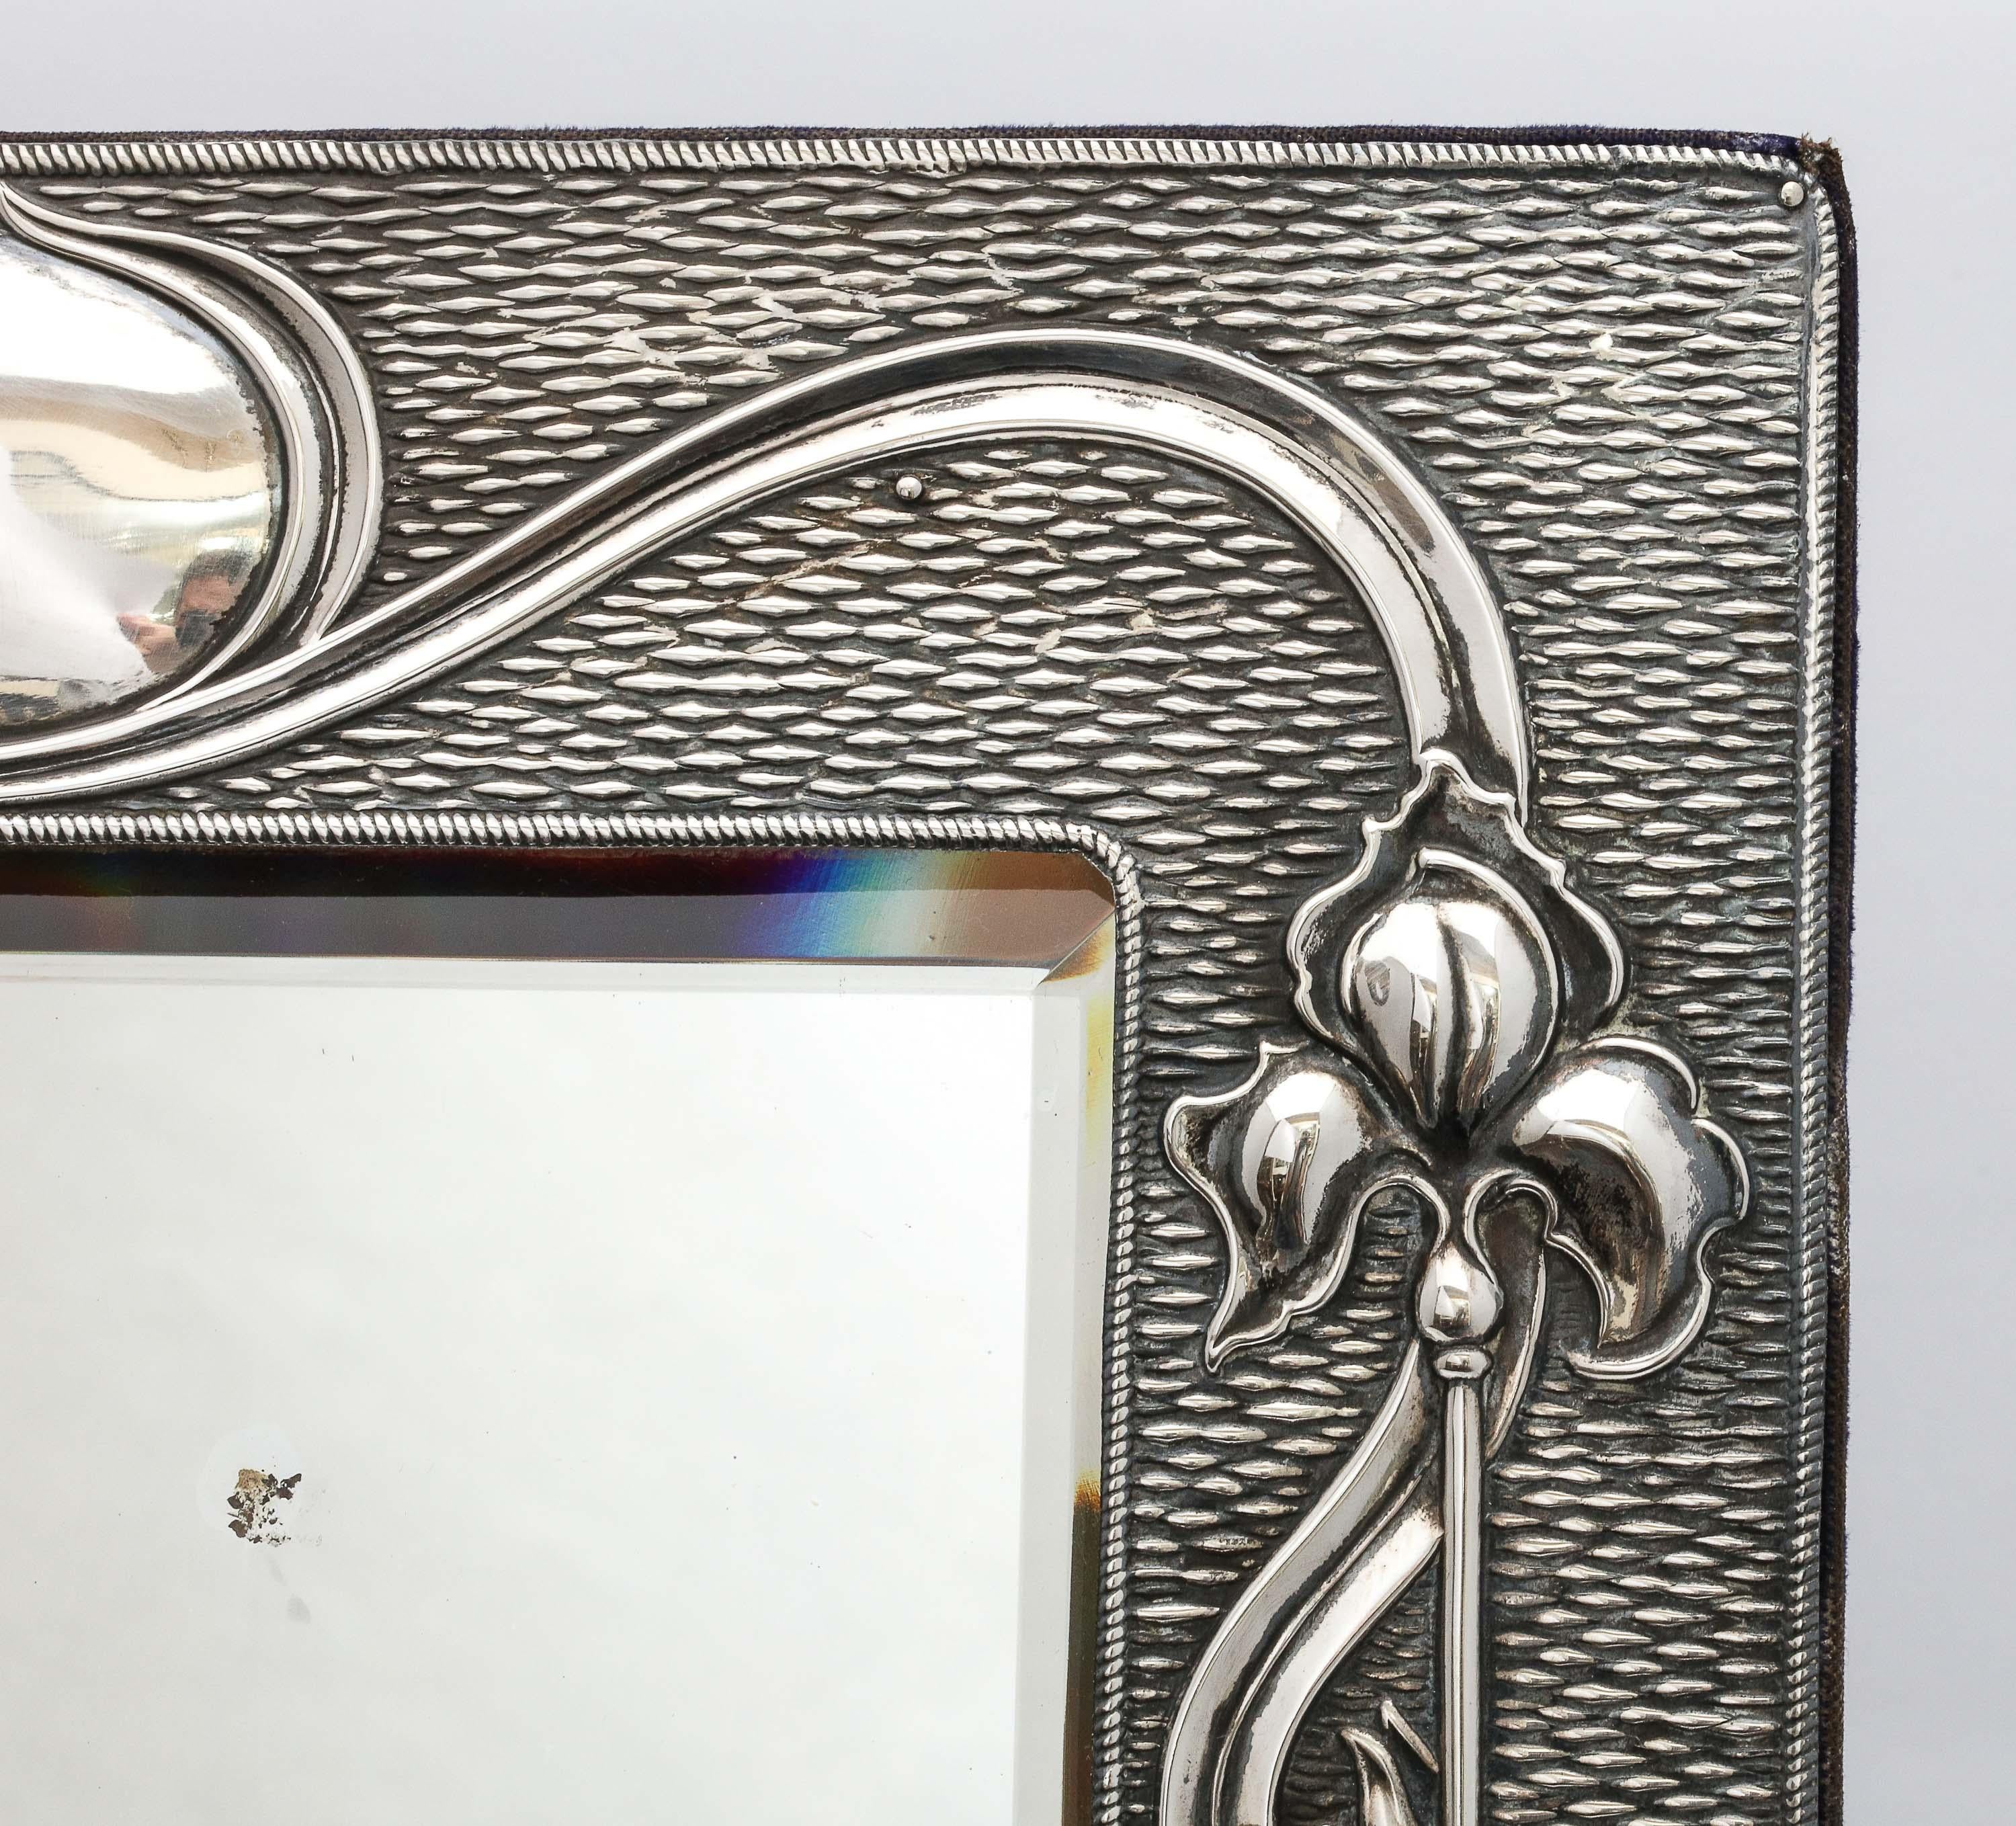 Early 20th Century Arts & Crafts Sterling Silver-Mounted Table Mirror, by A. & J. Zimmerman